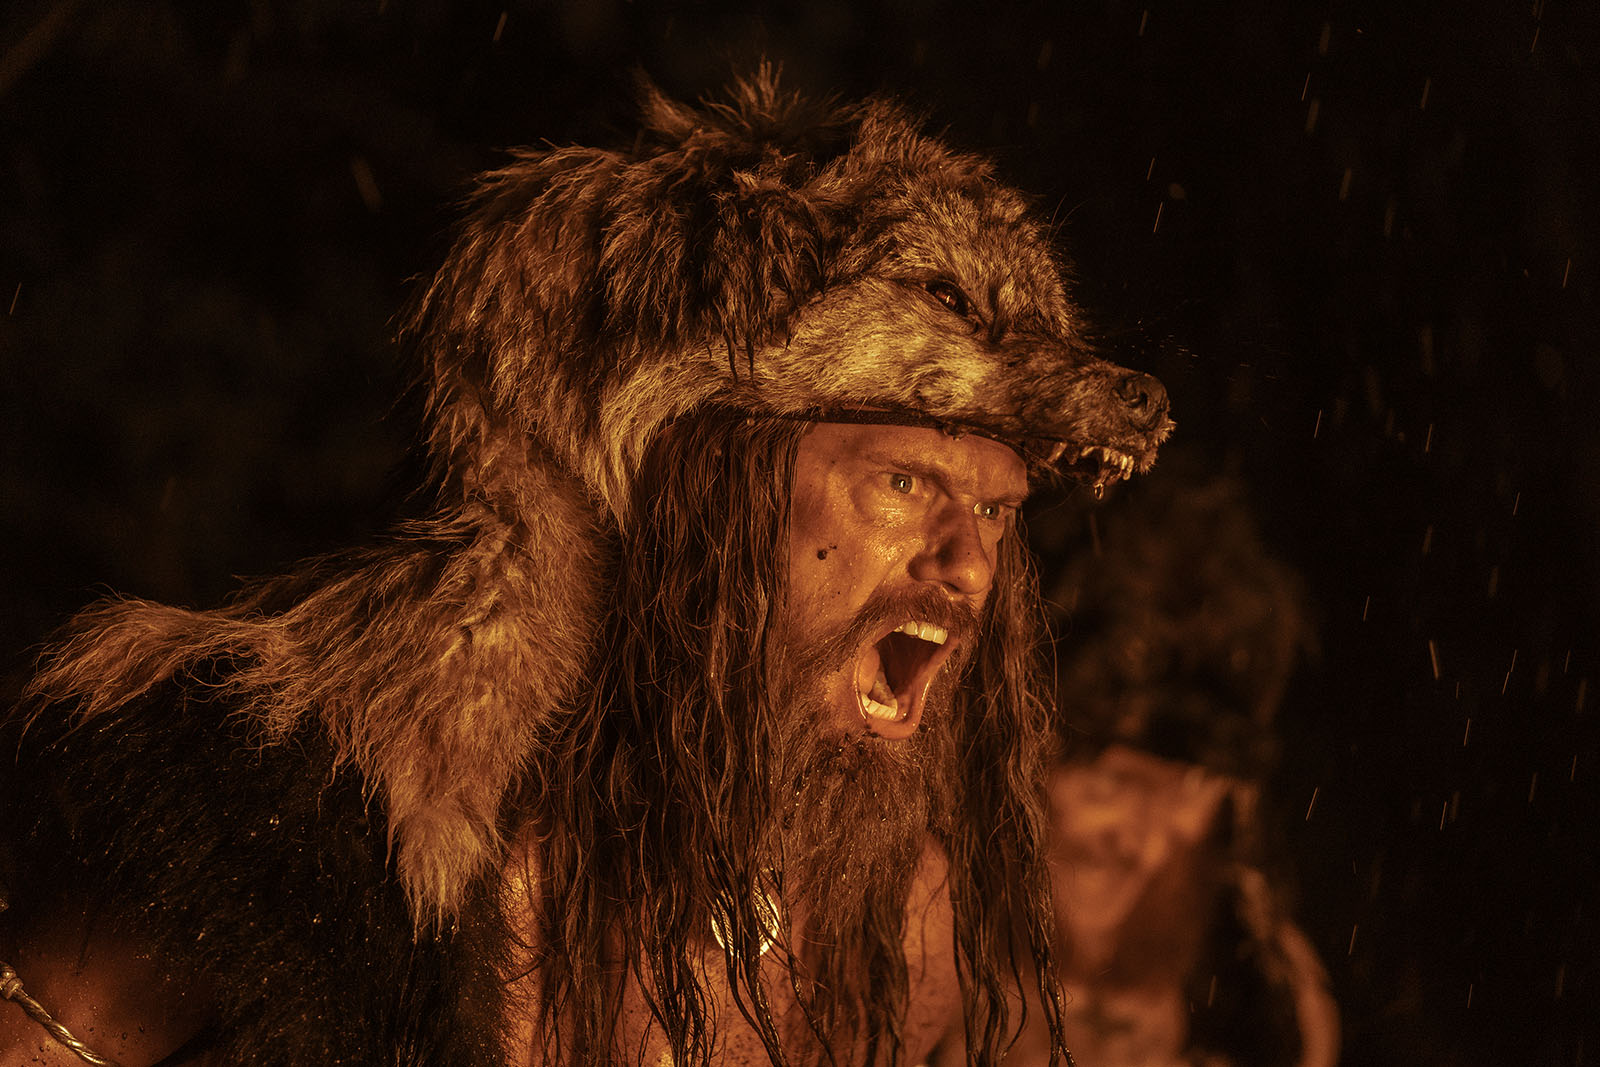 Alexander Skarsgård as Amleth, the Viking prince seeking vengeance for his father’s murder. Image © Focus Features